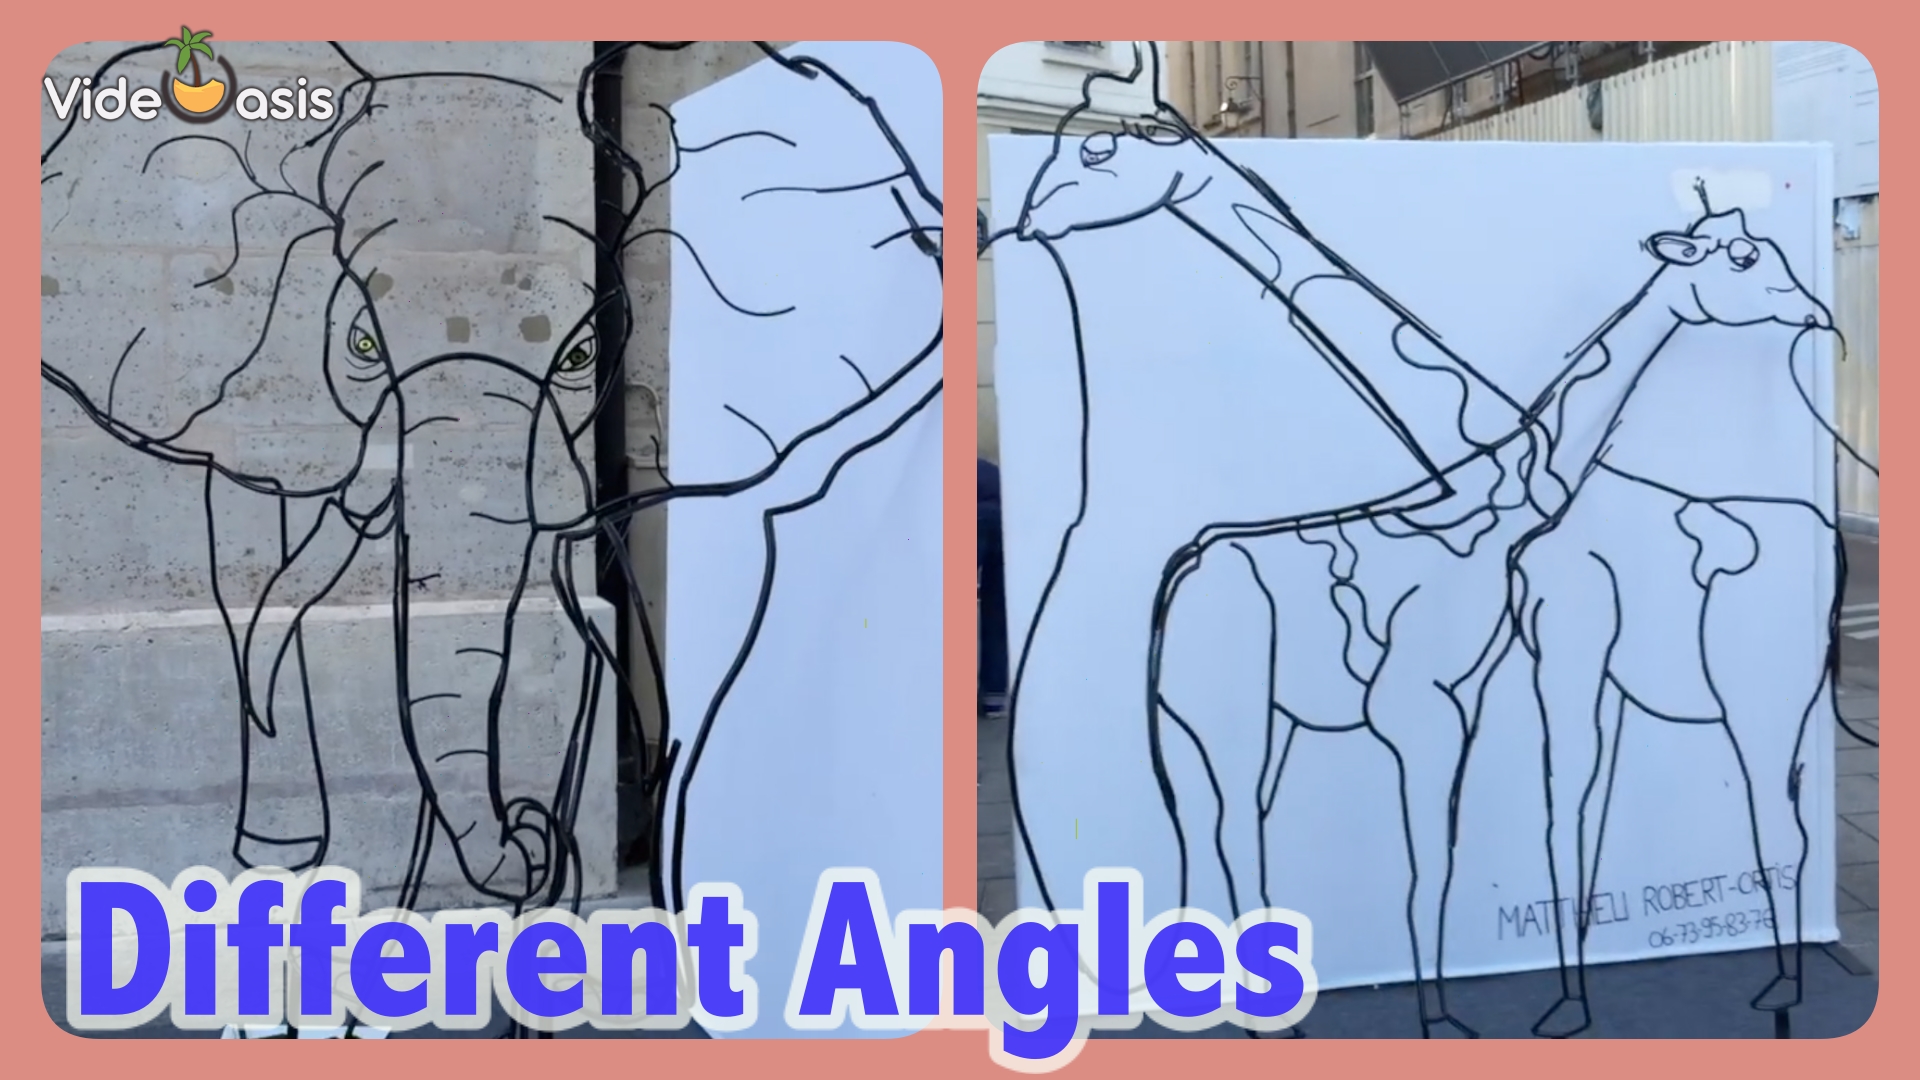 Sculpture Changes Picture At Different Angles ｜VideOasis